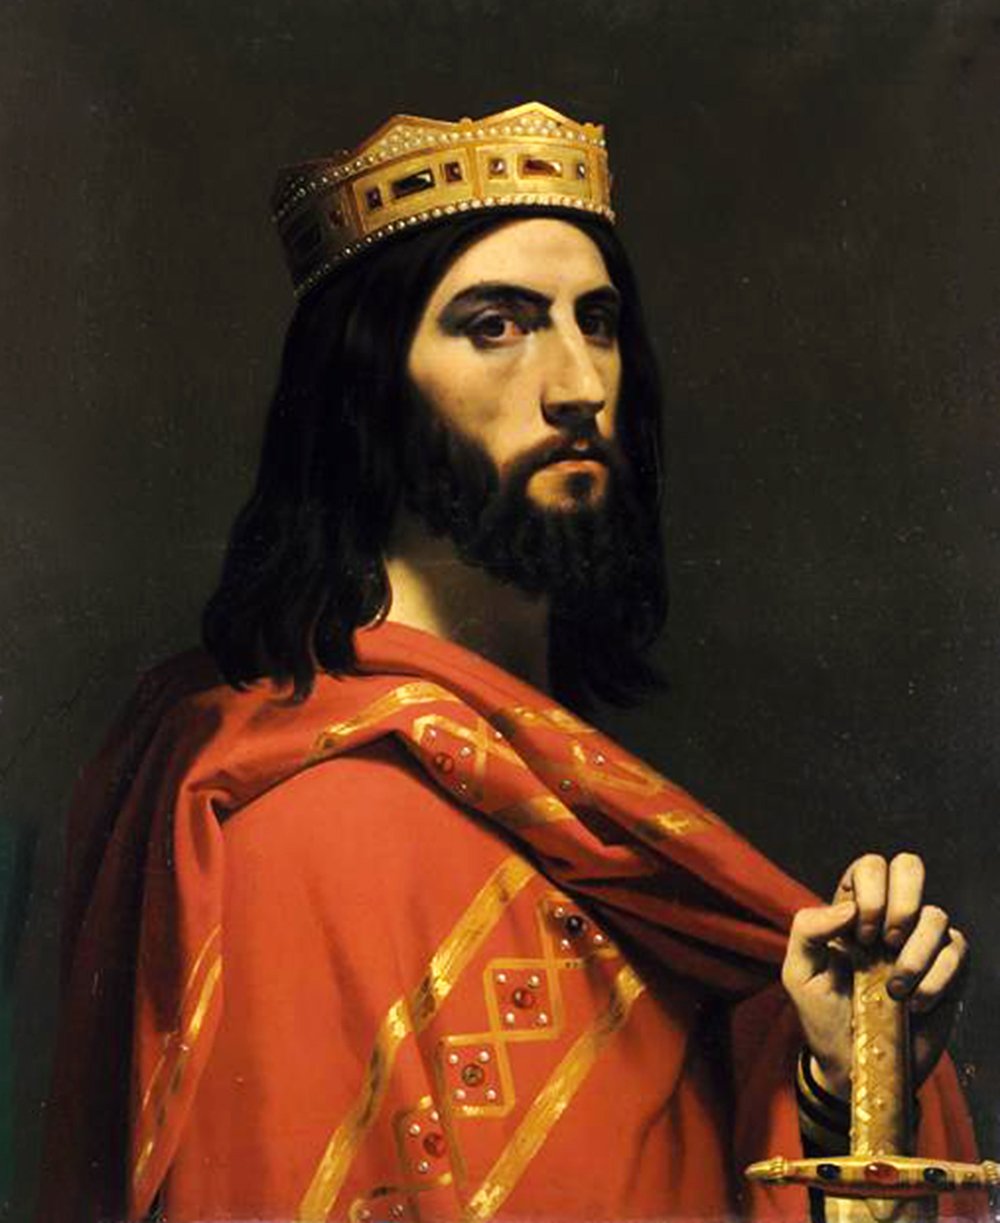 A painting of Dagobert I, King of Austrasia, Neustria, and Burgundy in a crown and red robe, holding a sword. He has dark hair and a beard.